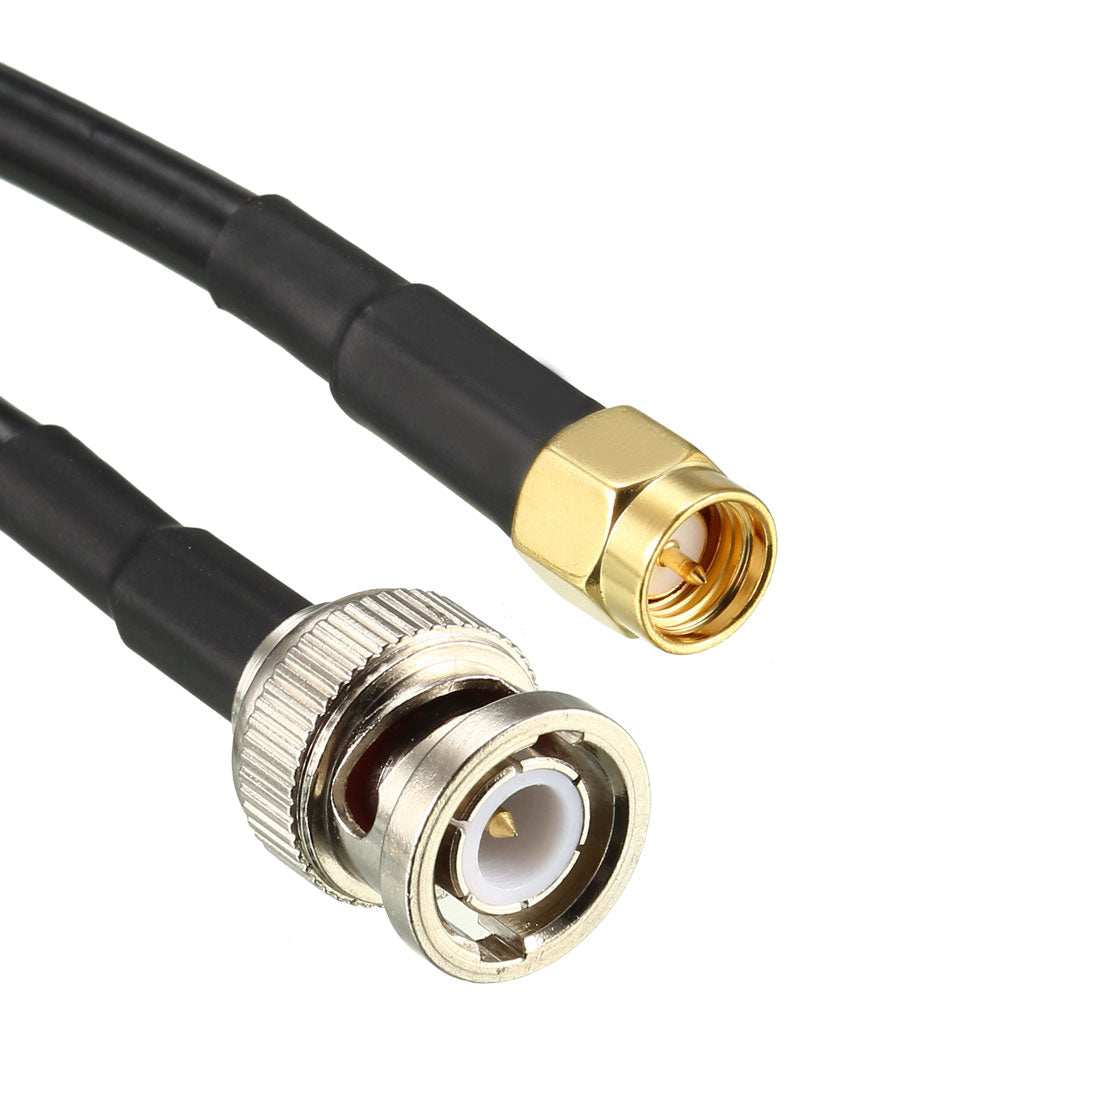 uxcell Uxcell RG58 Coaxial Cable with BNC Male to SMA Male Connectors 50 Ohm 3 ft